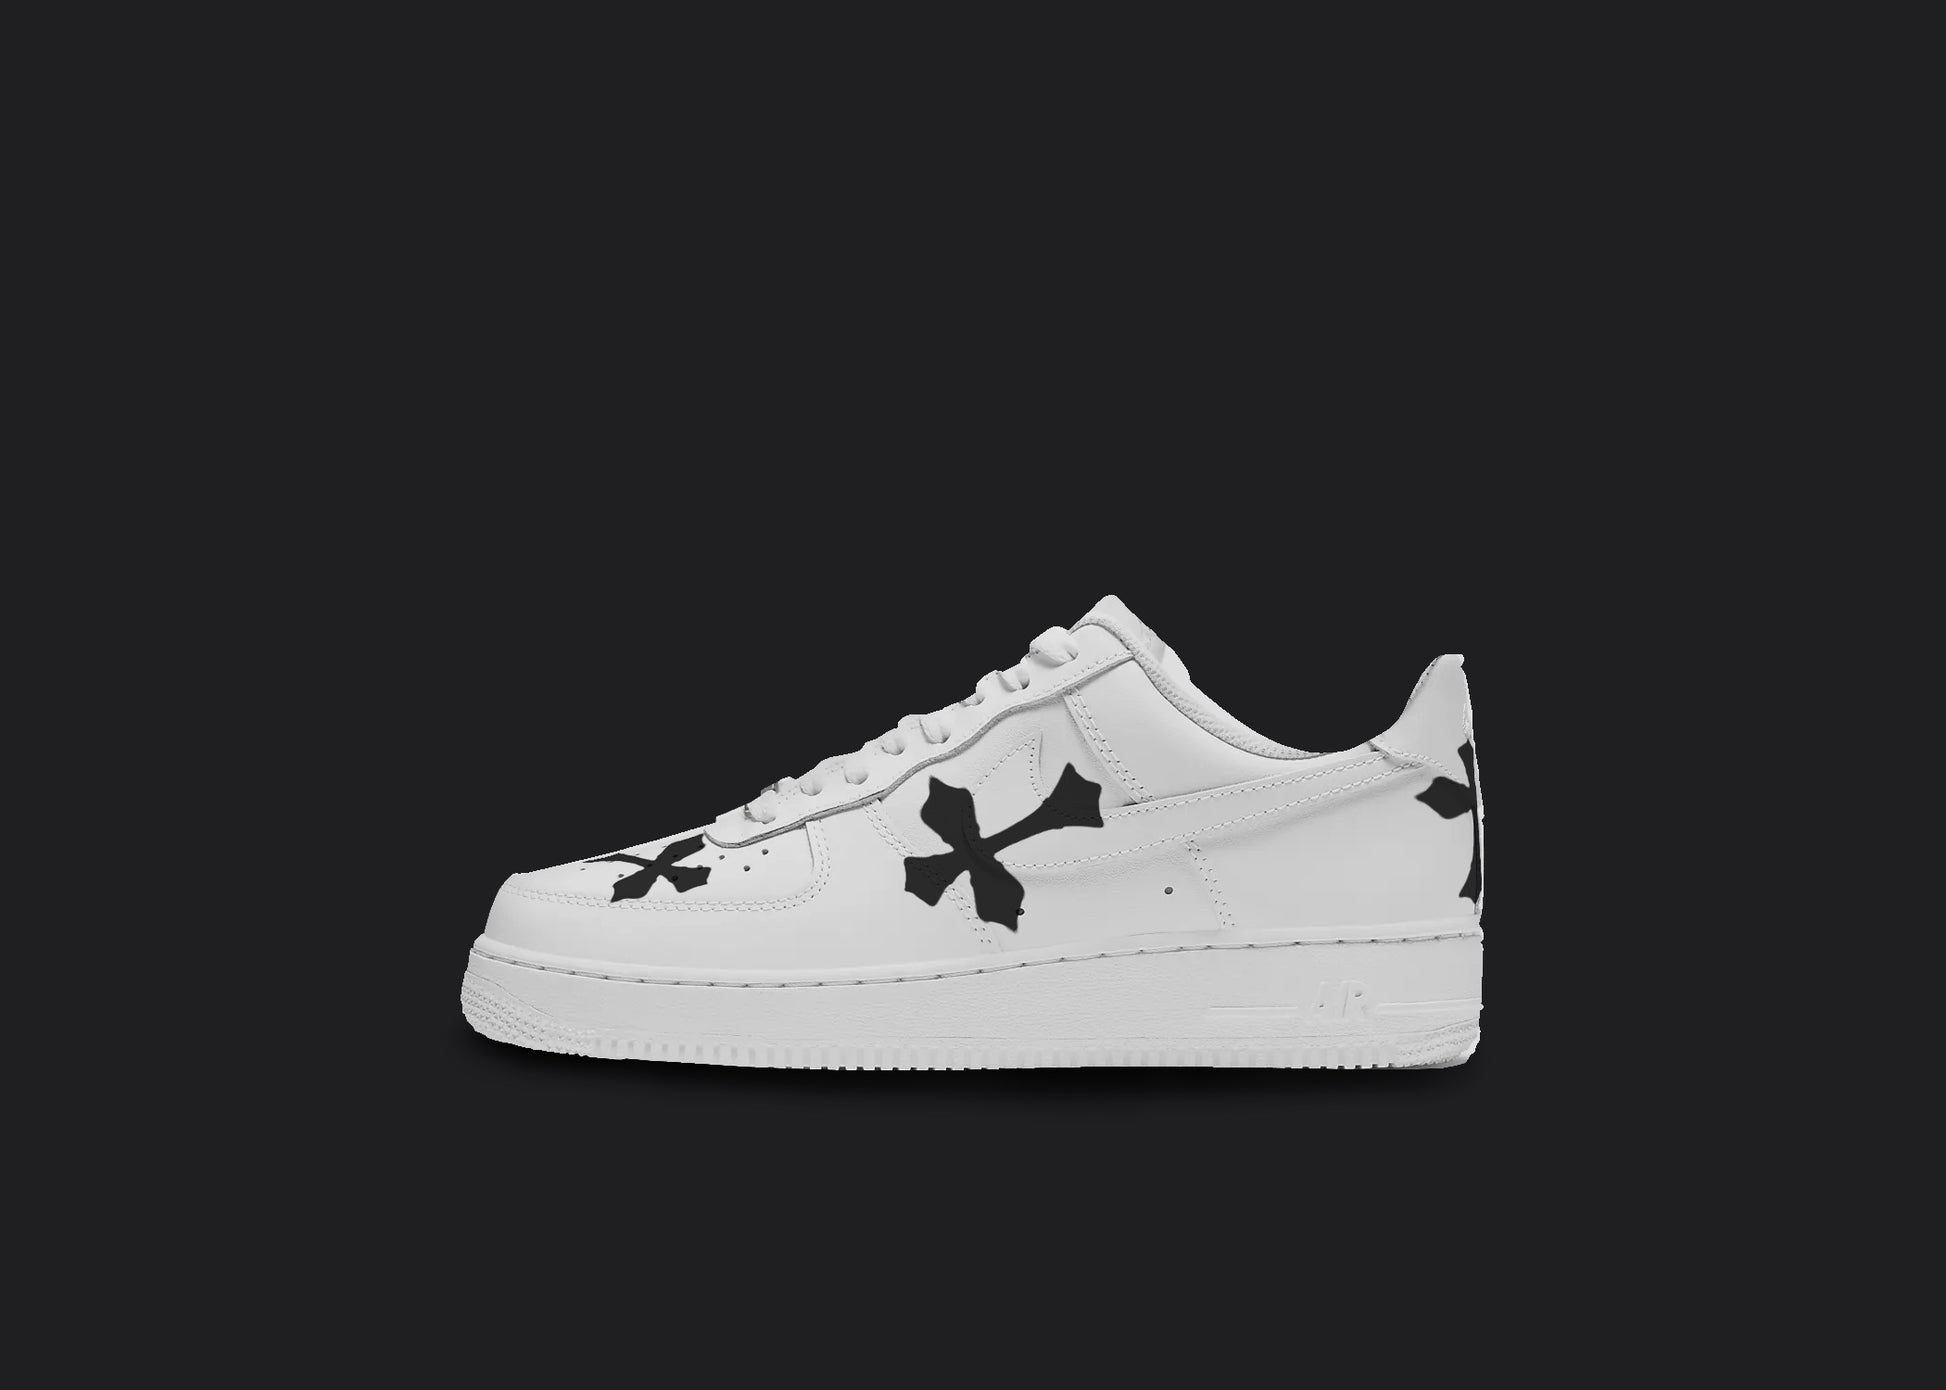 The image is featuring a Custom Nike Air force 1 sneakers on a blank black background. All over the white nike sneakers are 3 visible black crosses